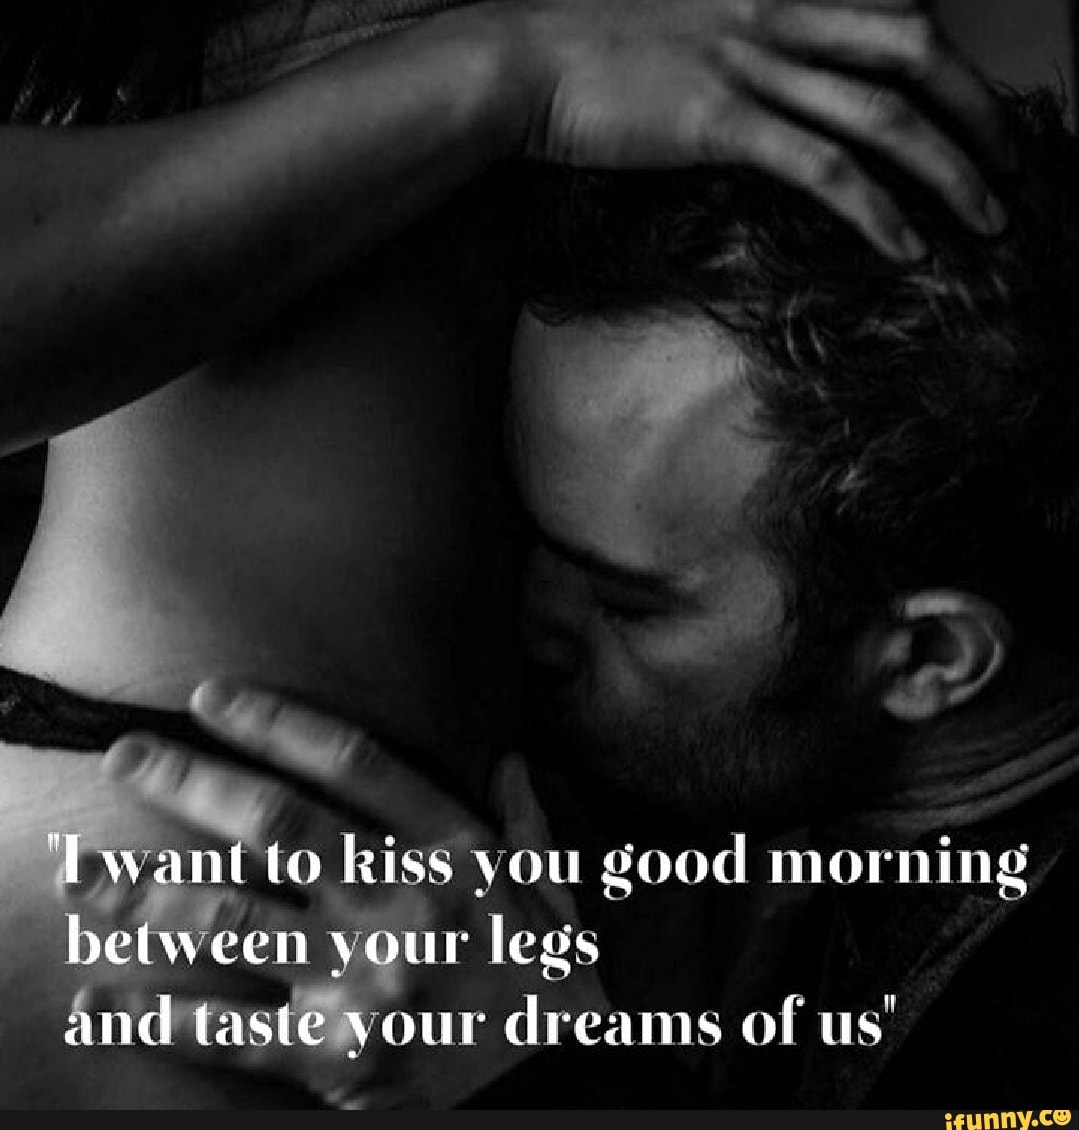 want to kiss you good morning between your legs and taste your dreams of us...